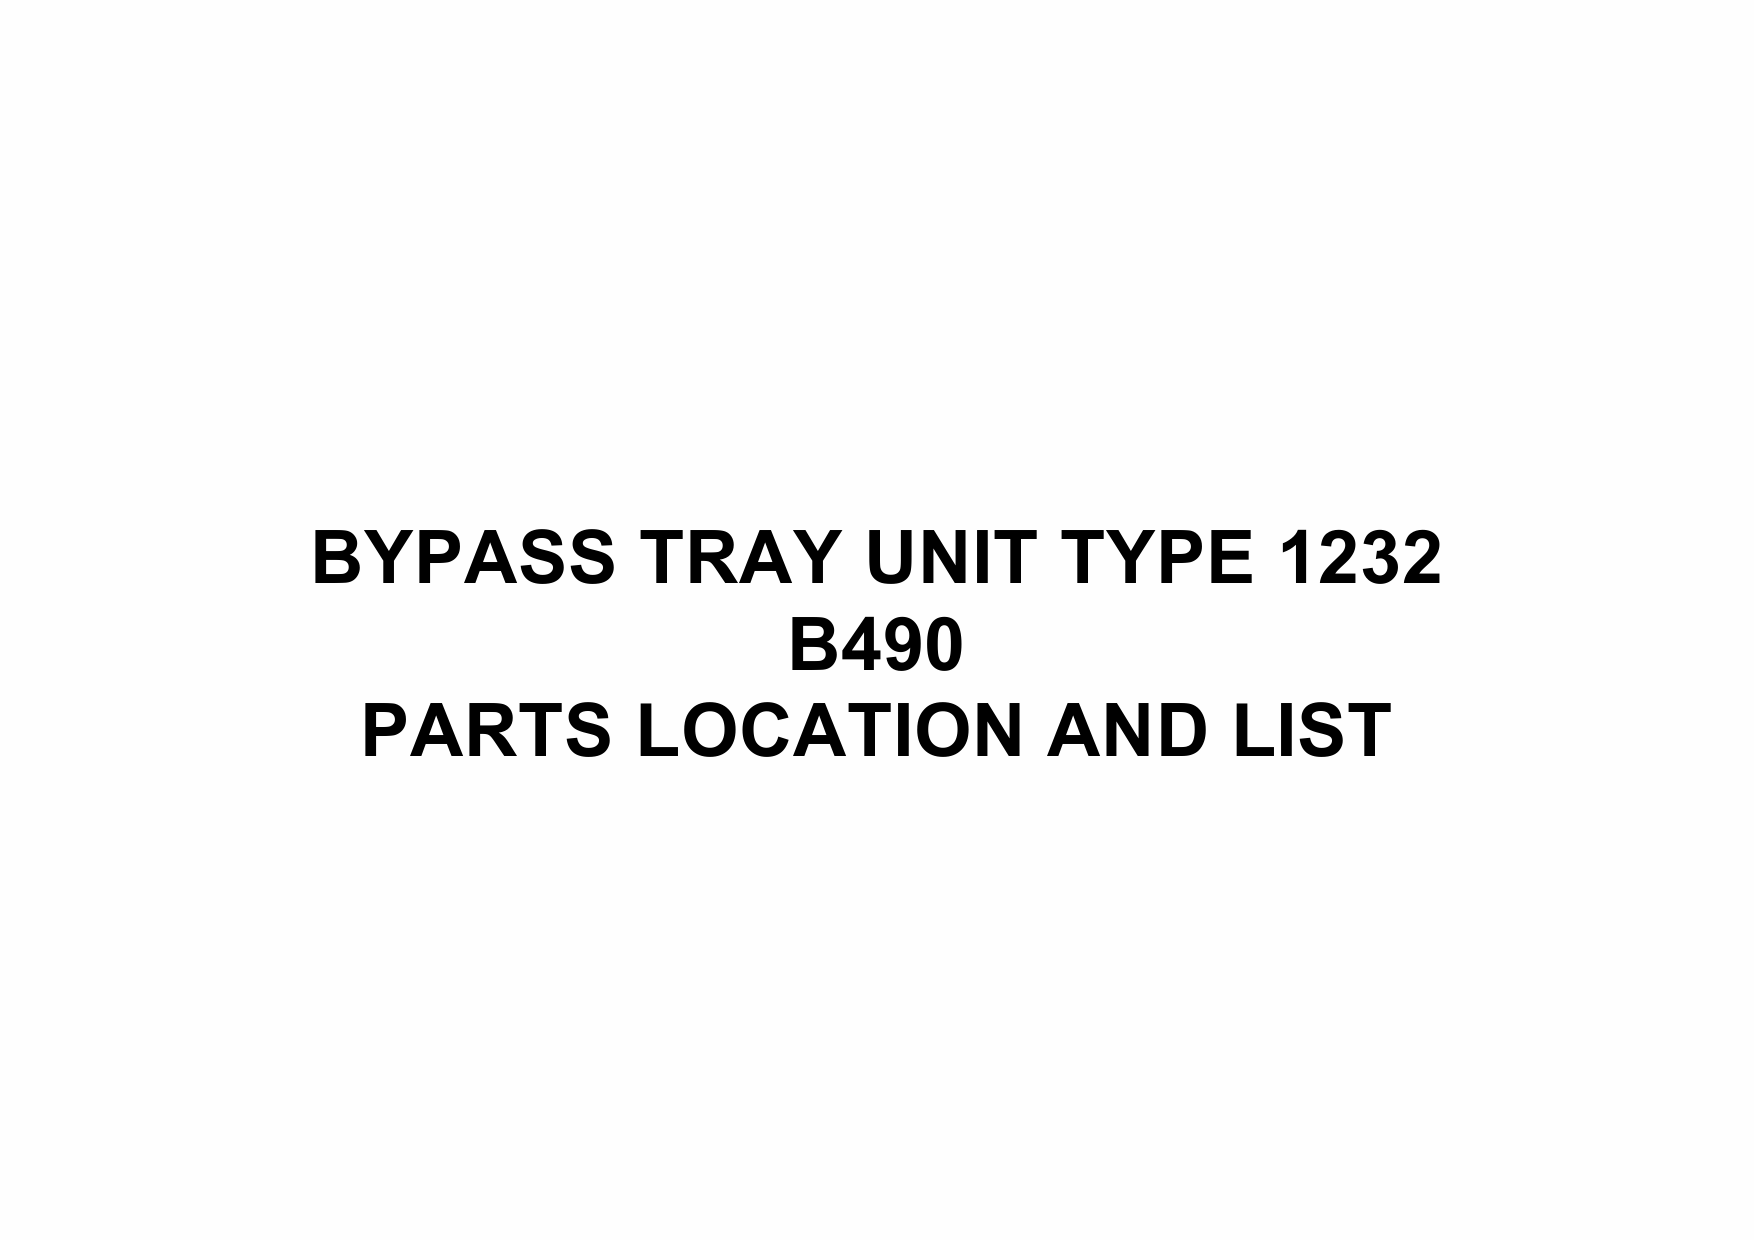 RICOH Options B490 BYPASS-TRAY-UNIT-TYPE-1232 Parts Catalog PDF download-1